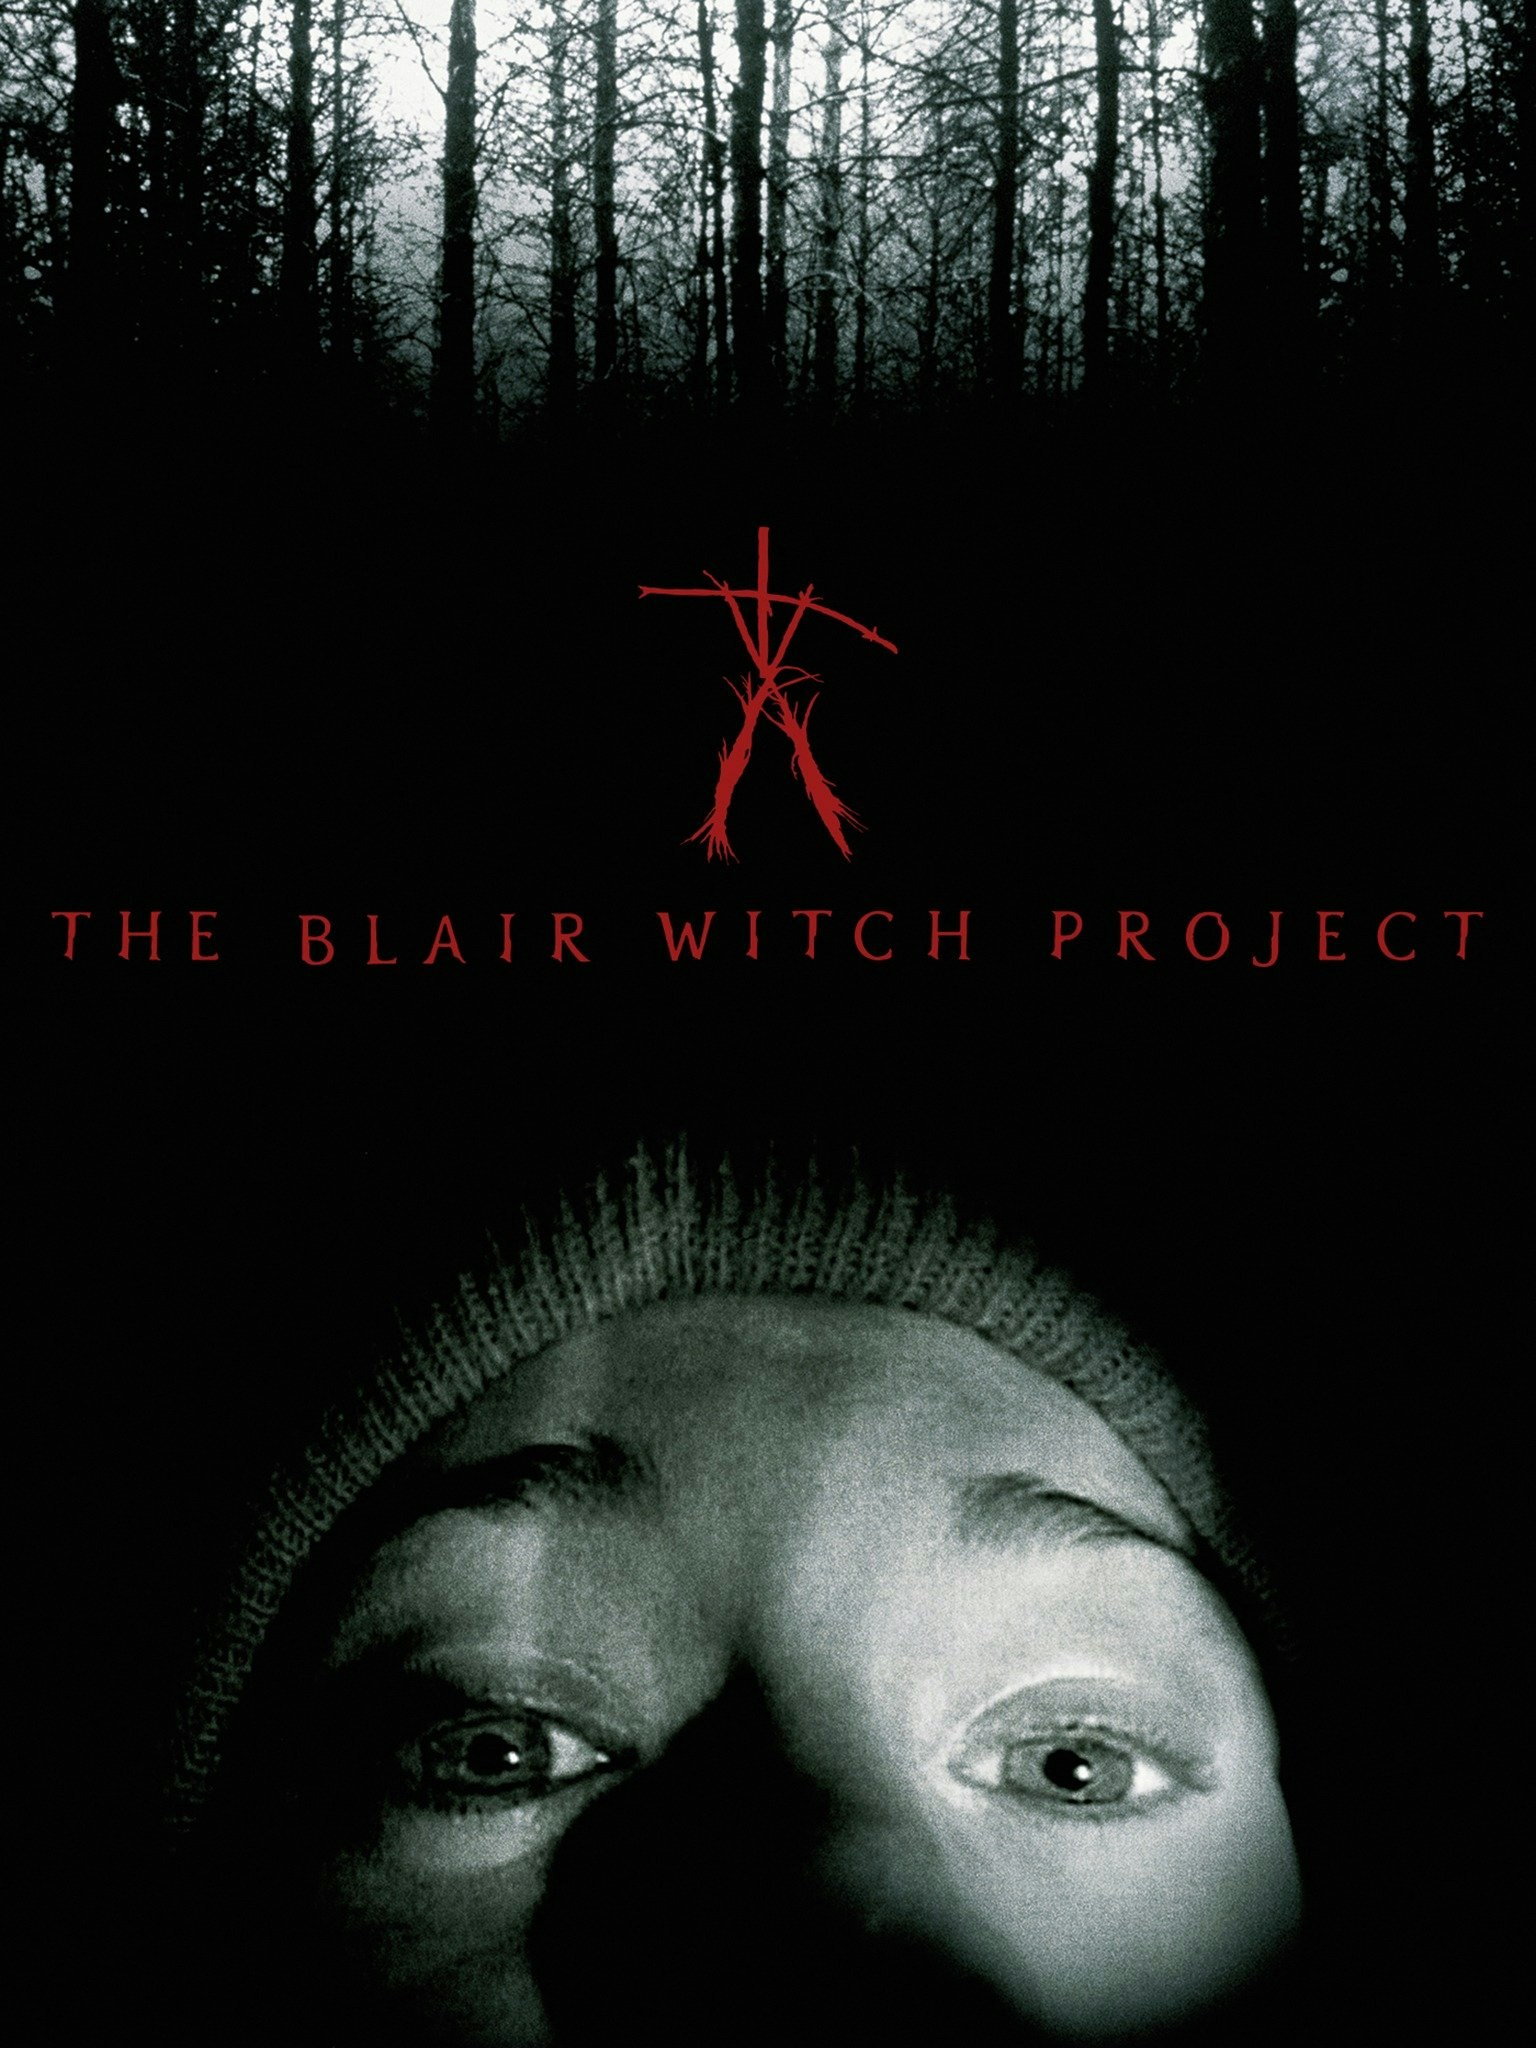 The blair witch project (movie poster)